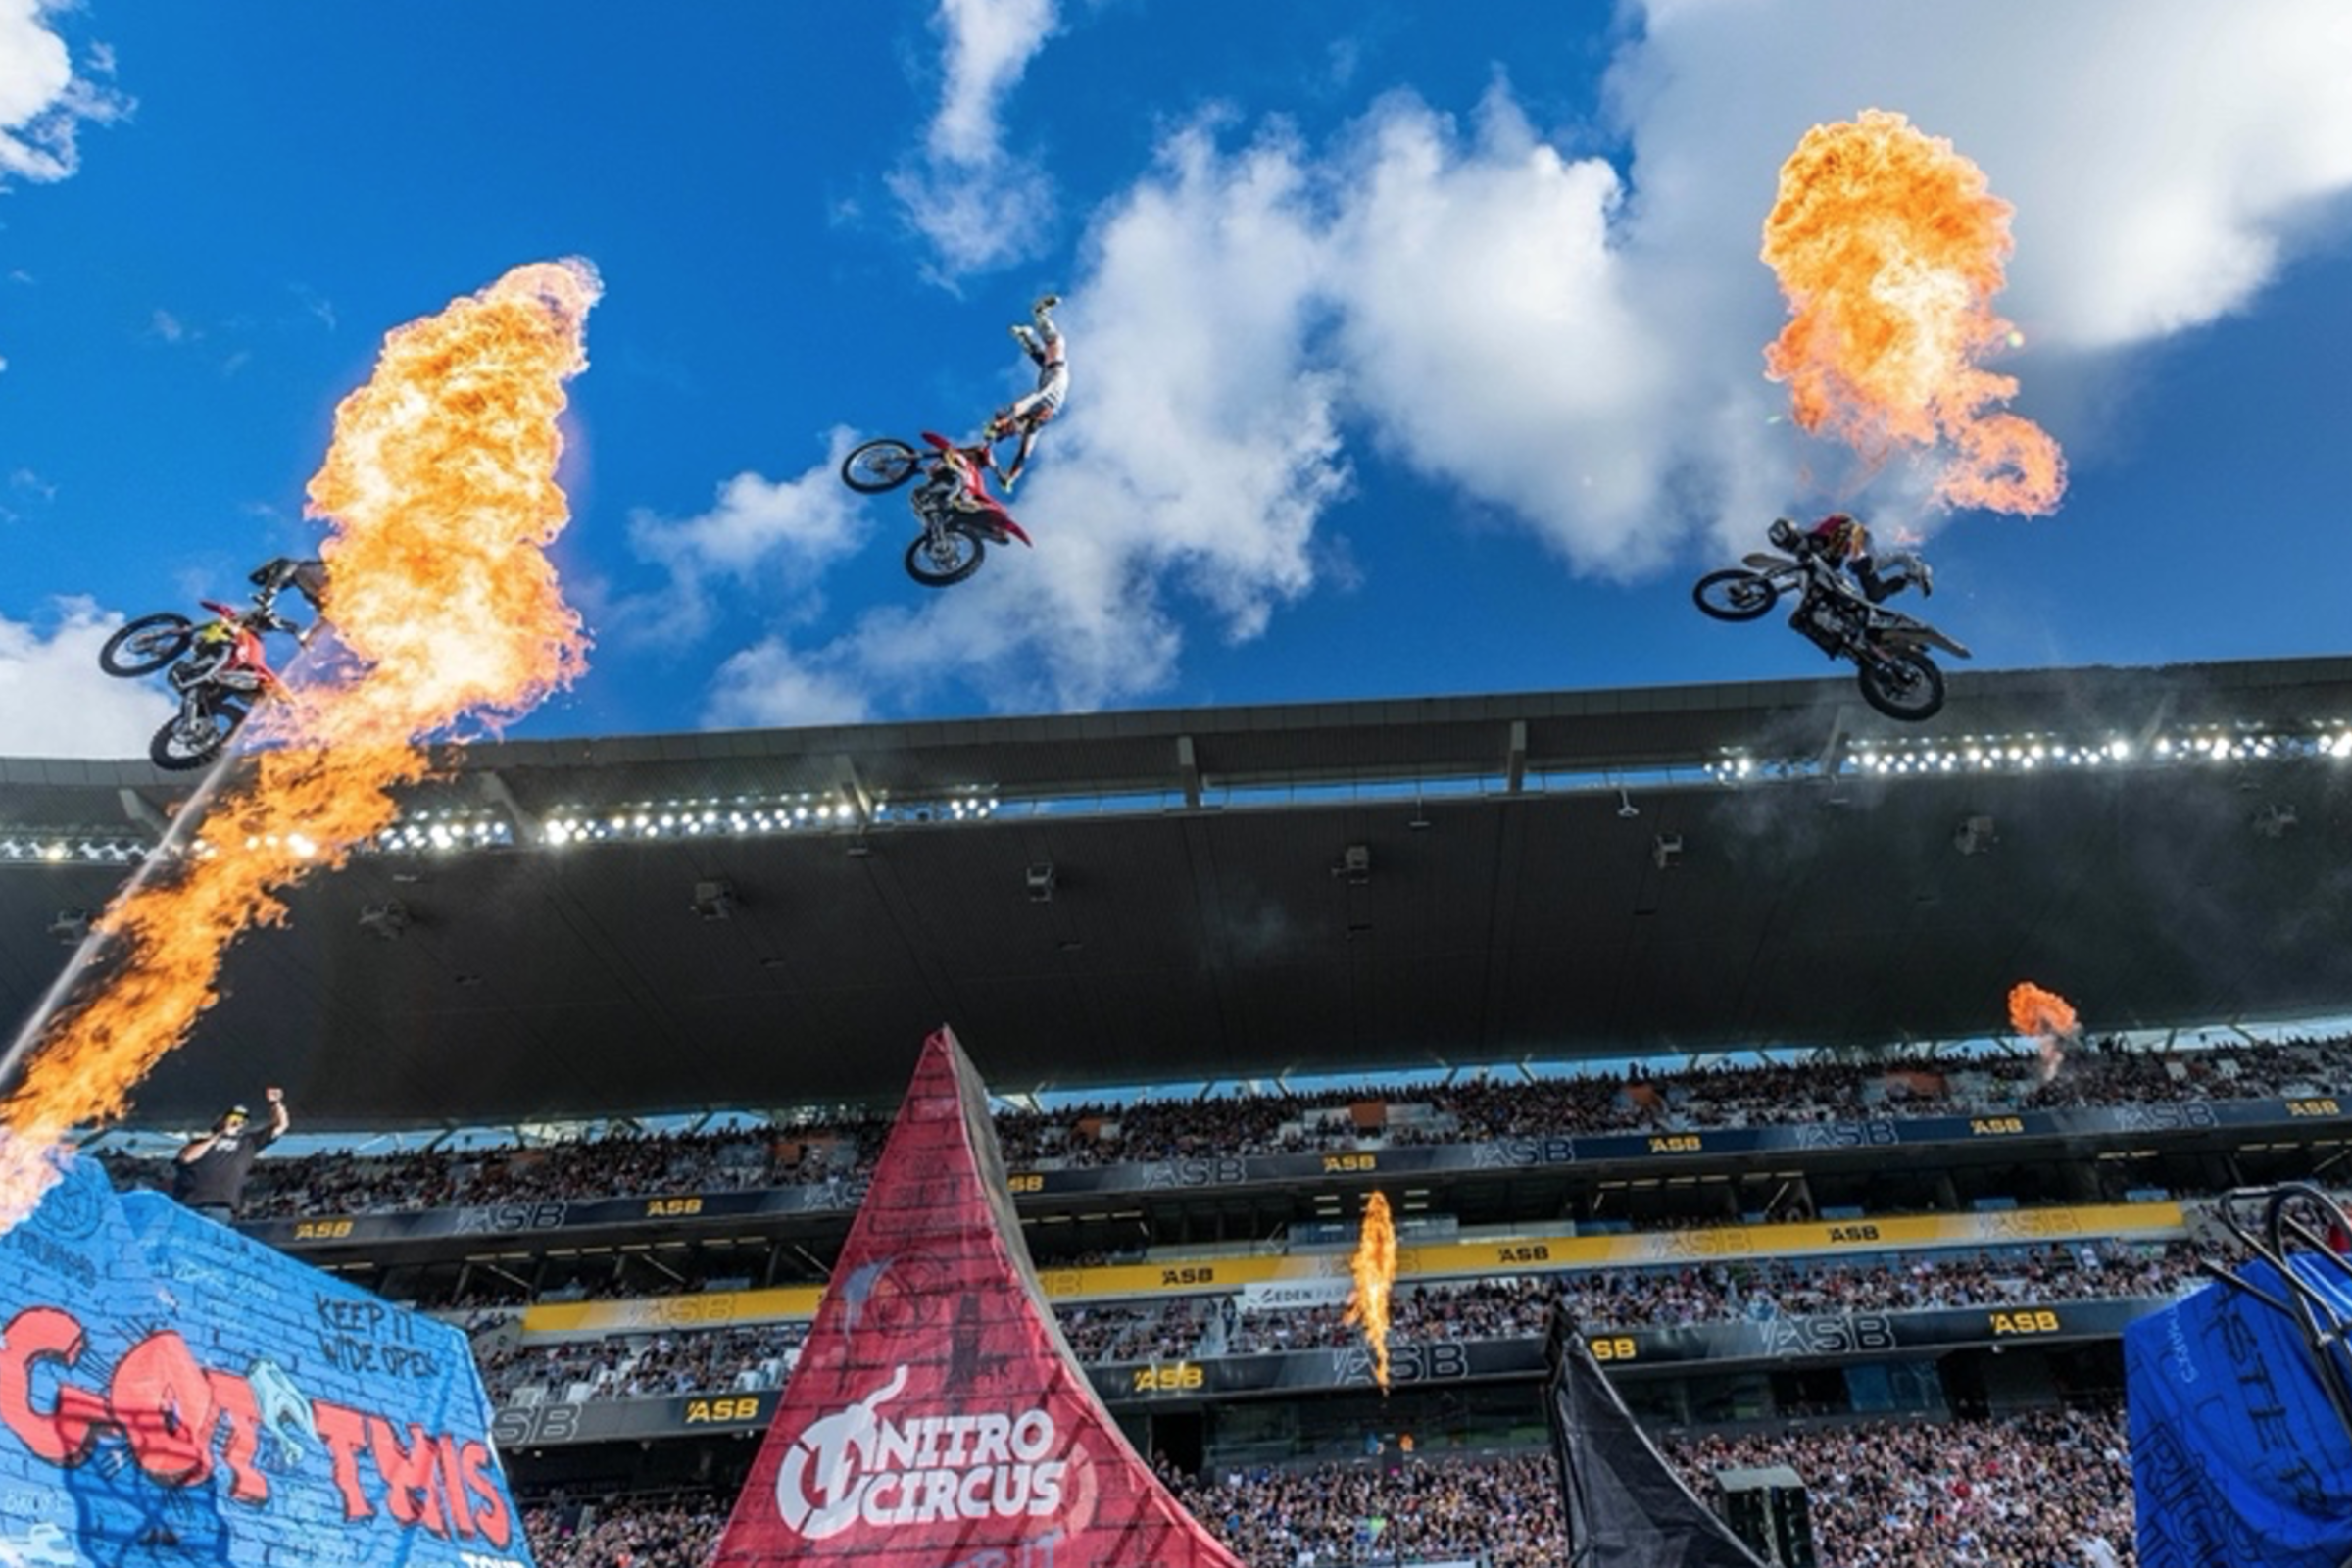 Nitro Circus Brings High-Adrenaline Live Entertainment Back With “You Got This” Tour